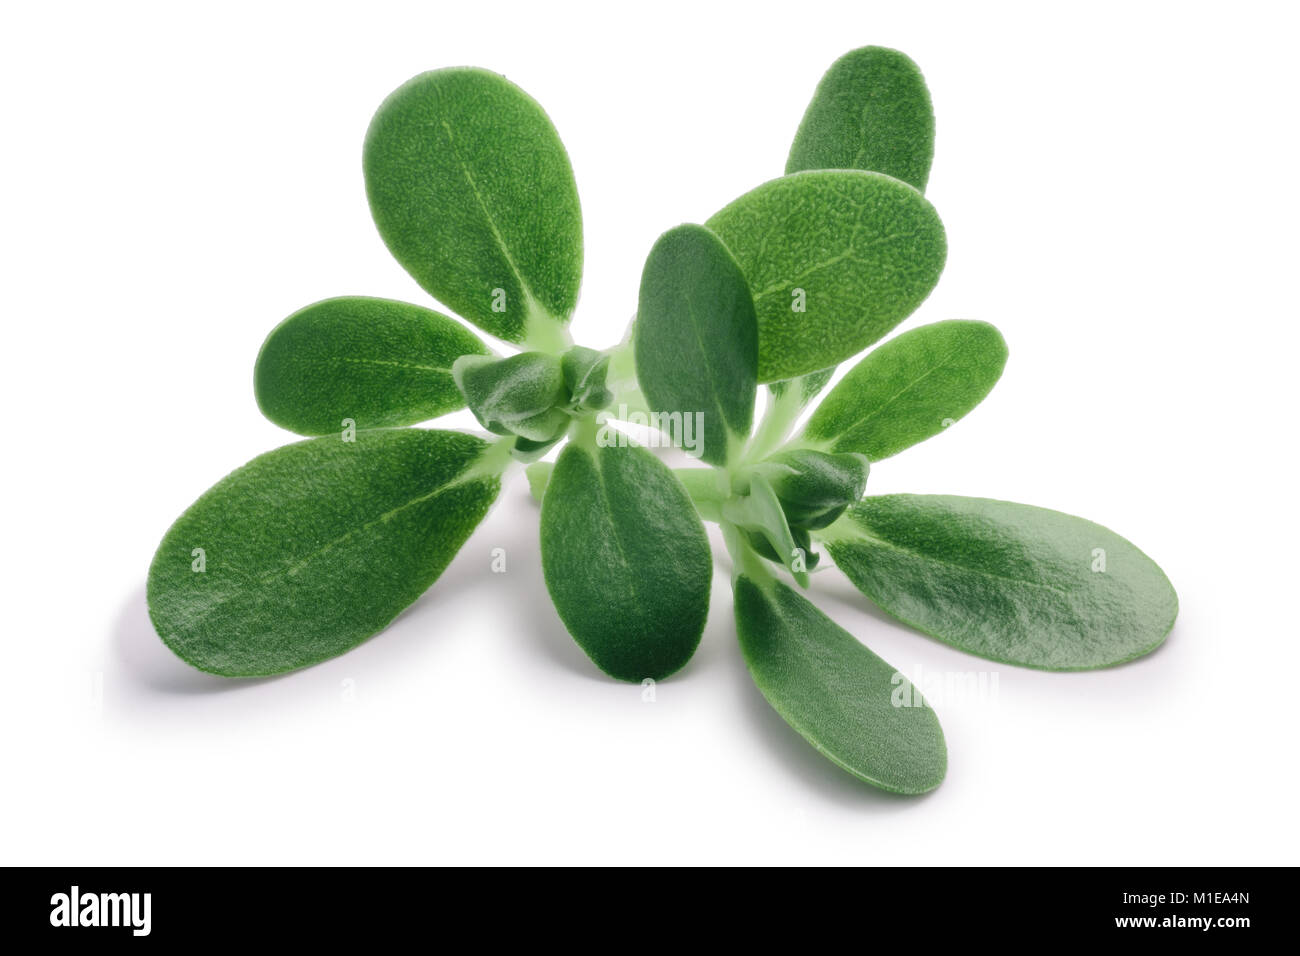 Common purslane (Portulaca oleracea) leaves. Clipping paths, shadow separated Stock Photo